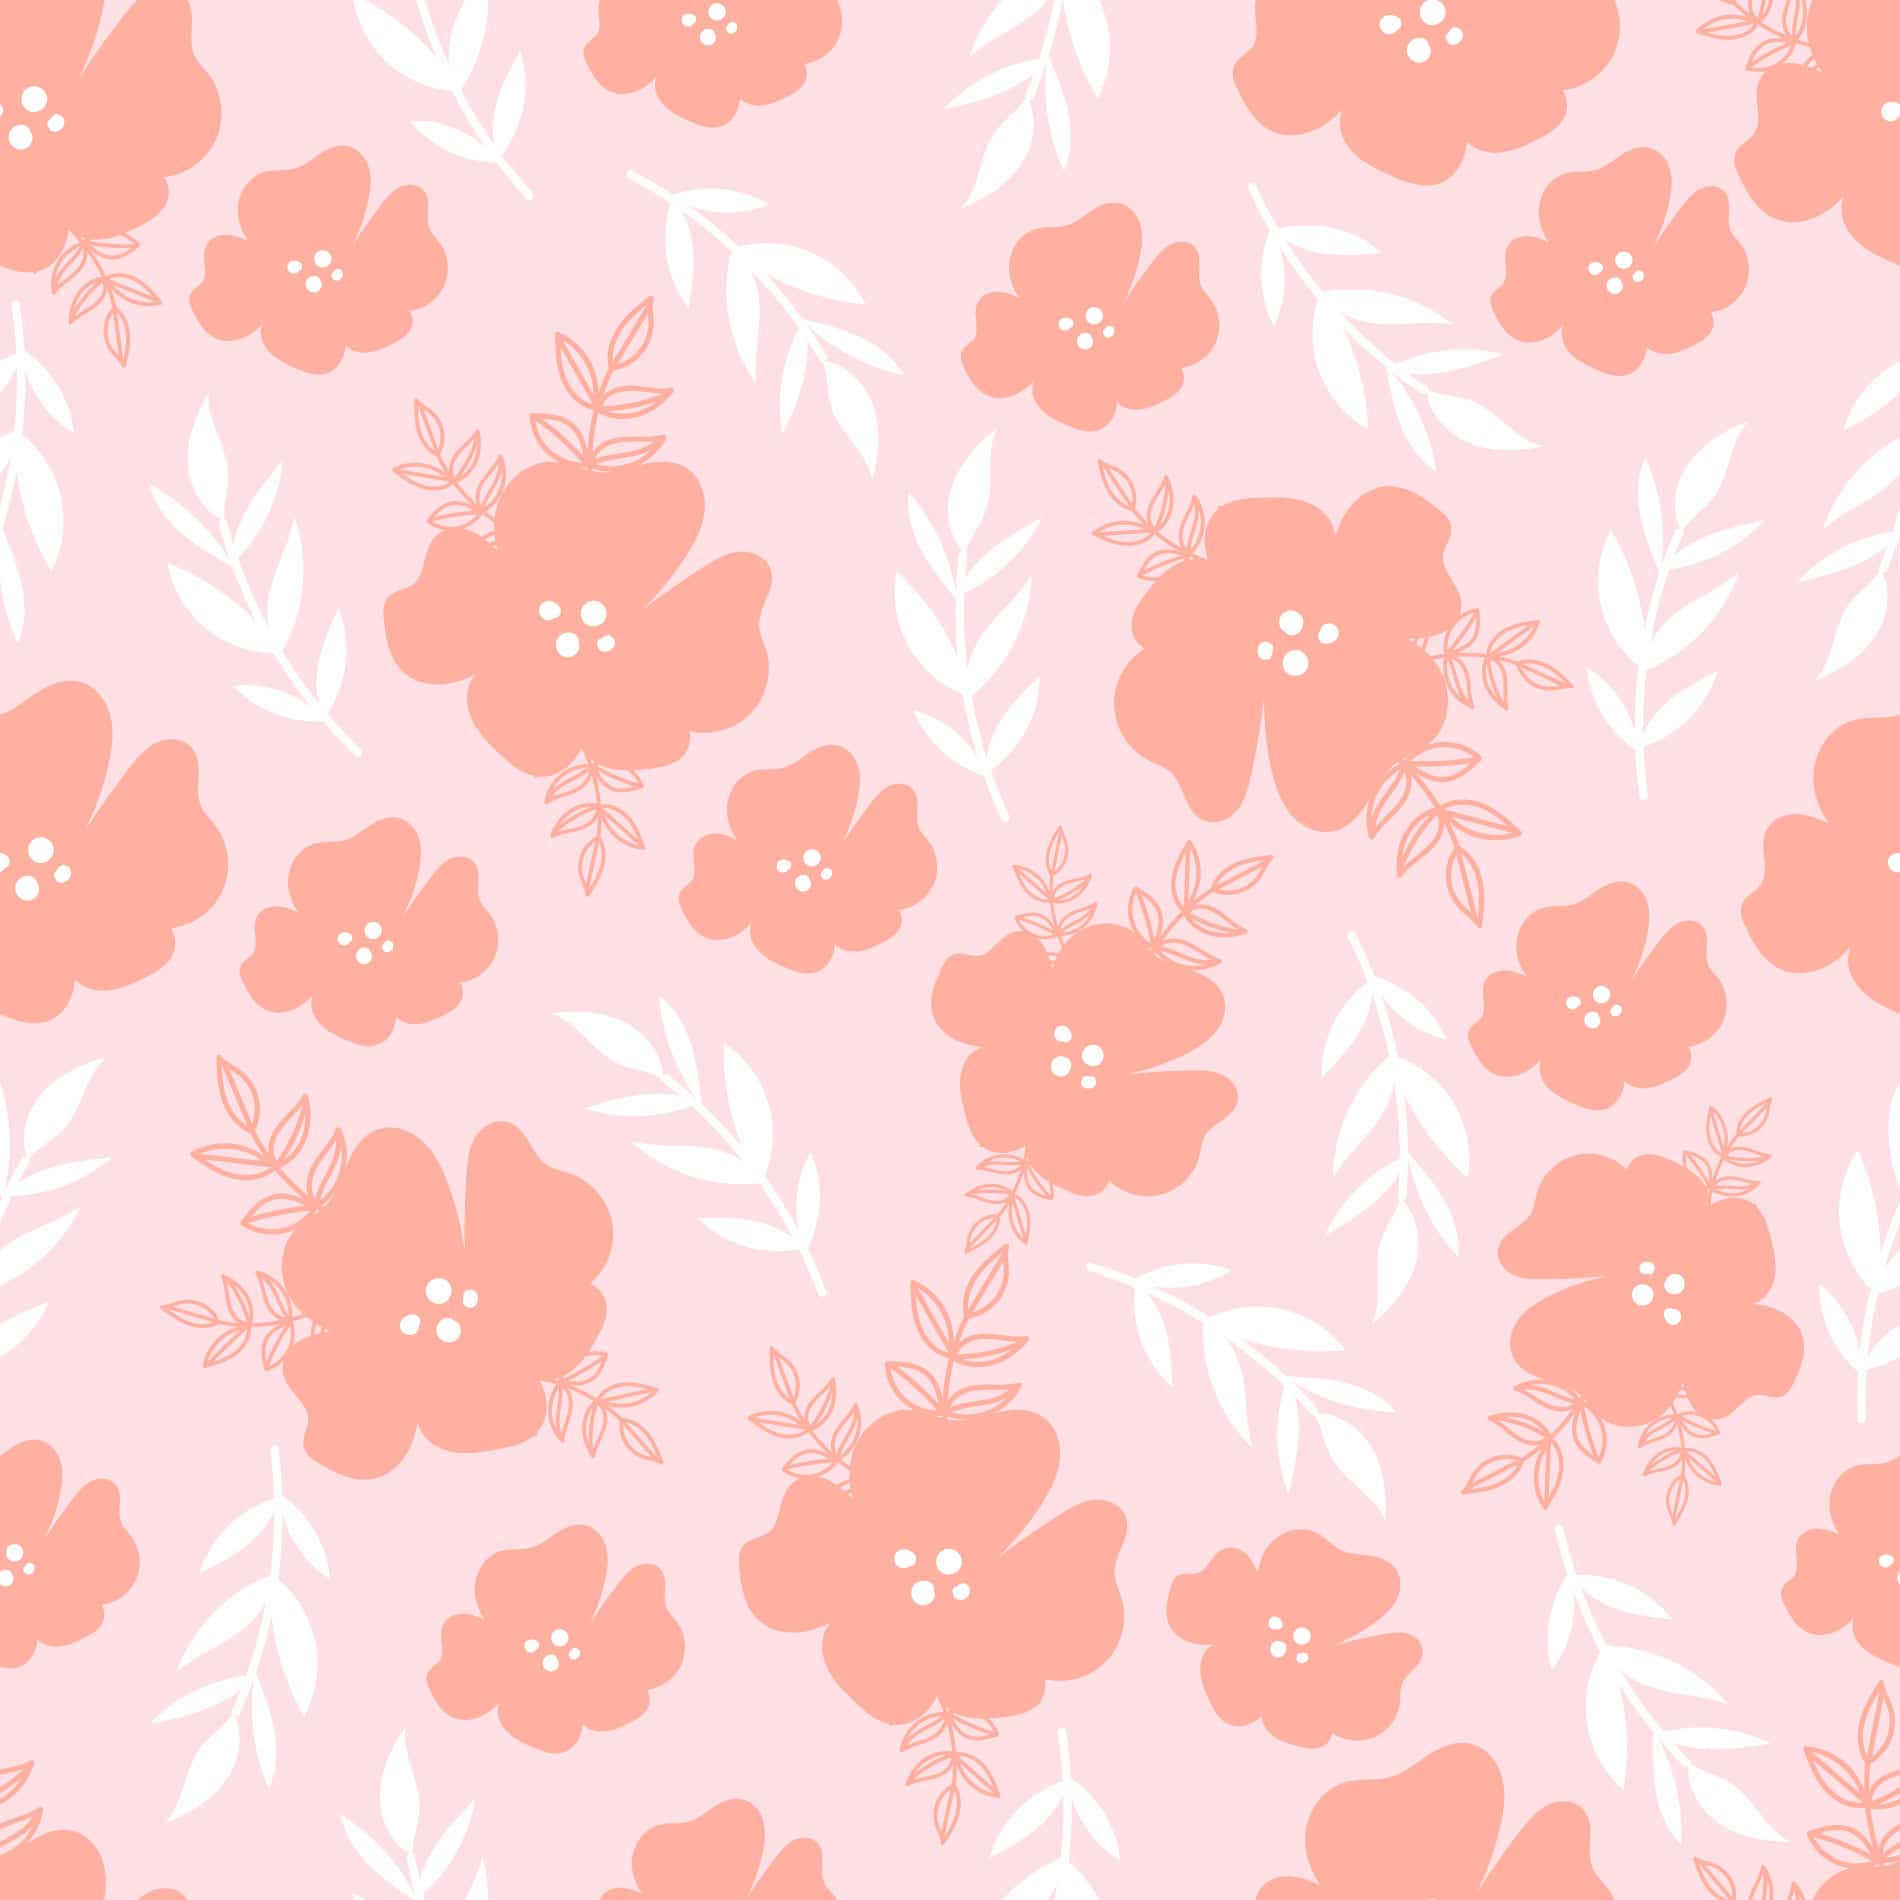 Aesthetic hibiscus floral wallpaper - Peel and Stick or Non-Pasted